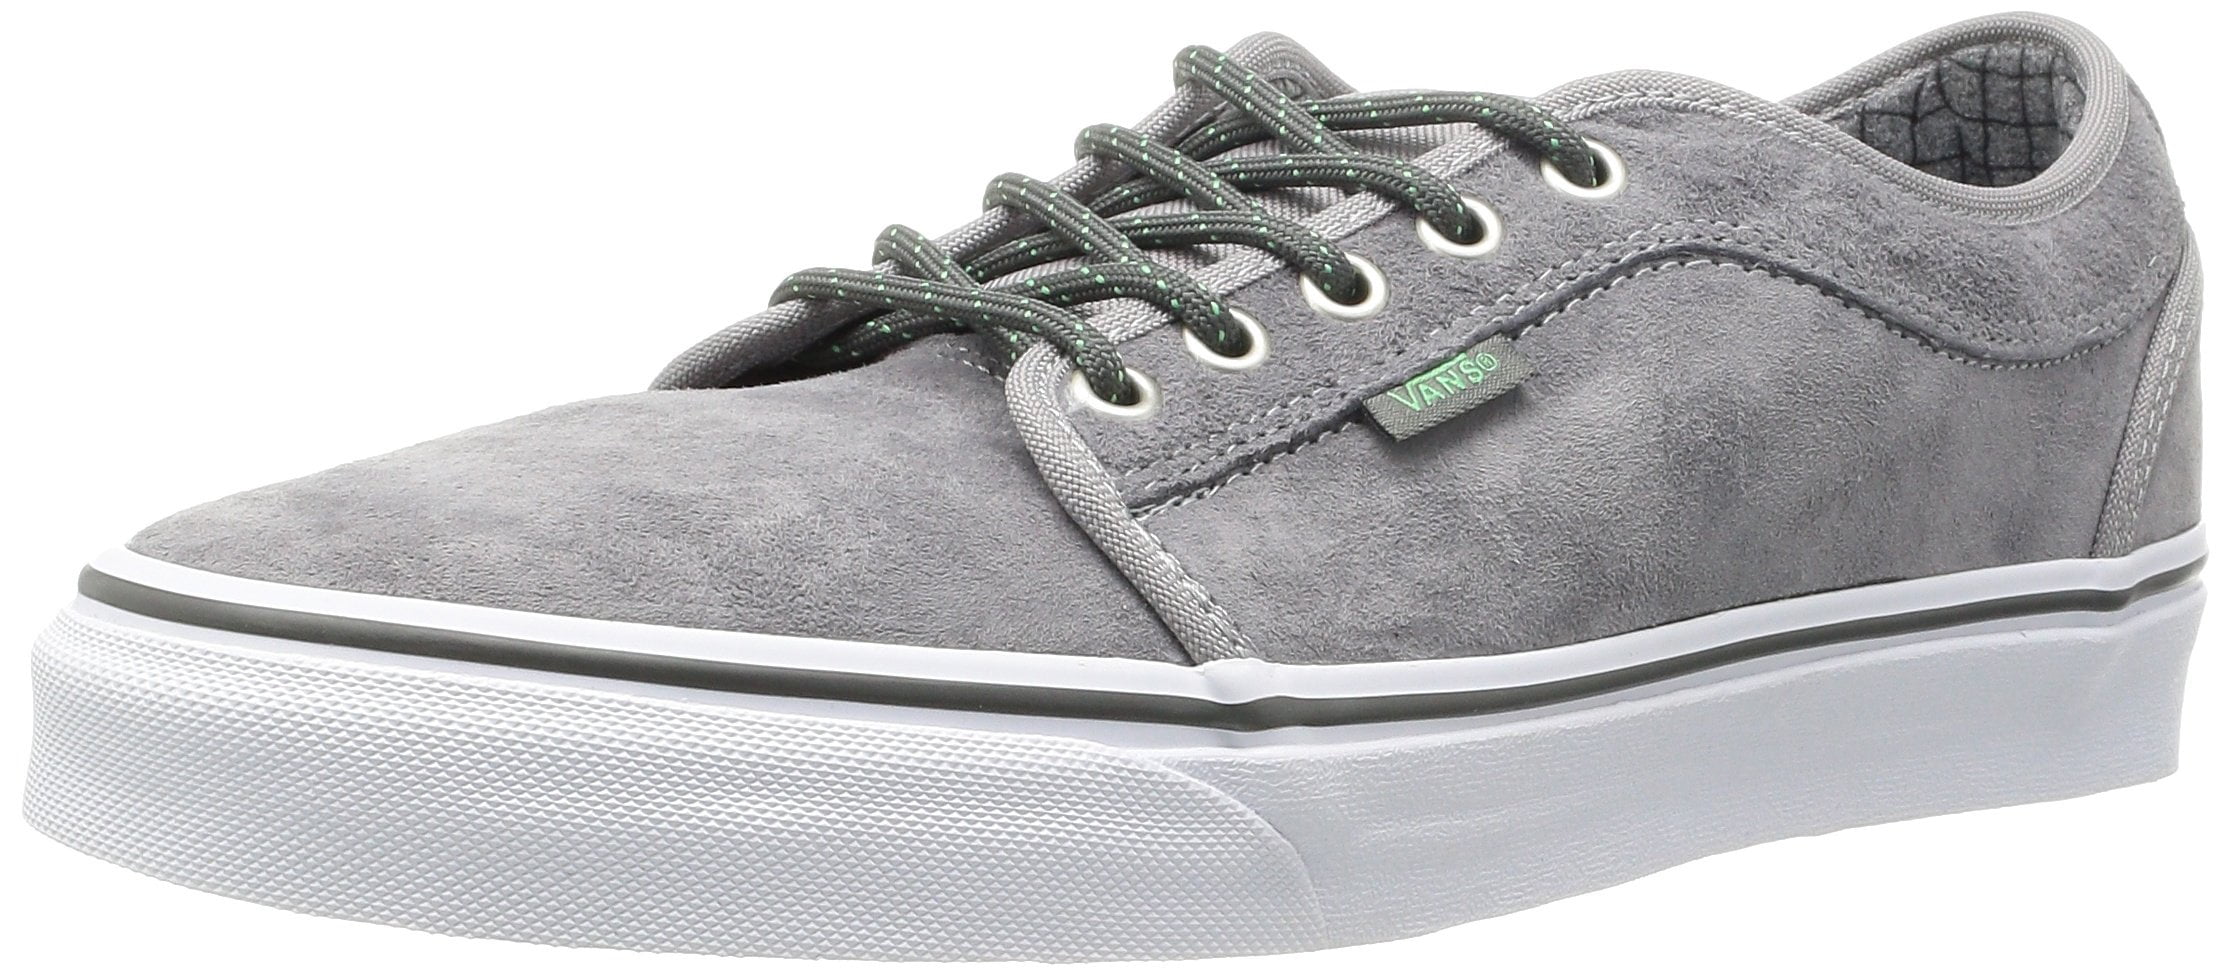 gray and mint vans